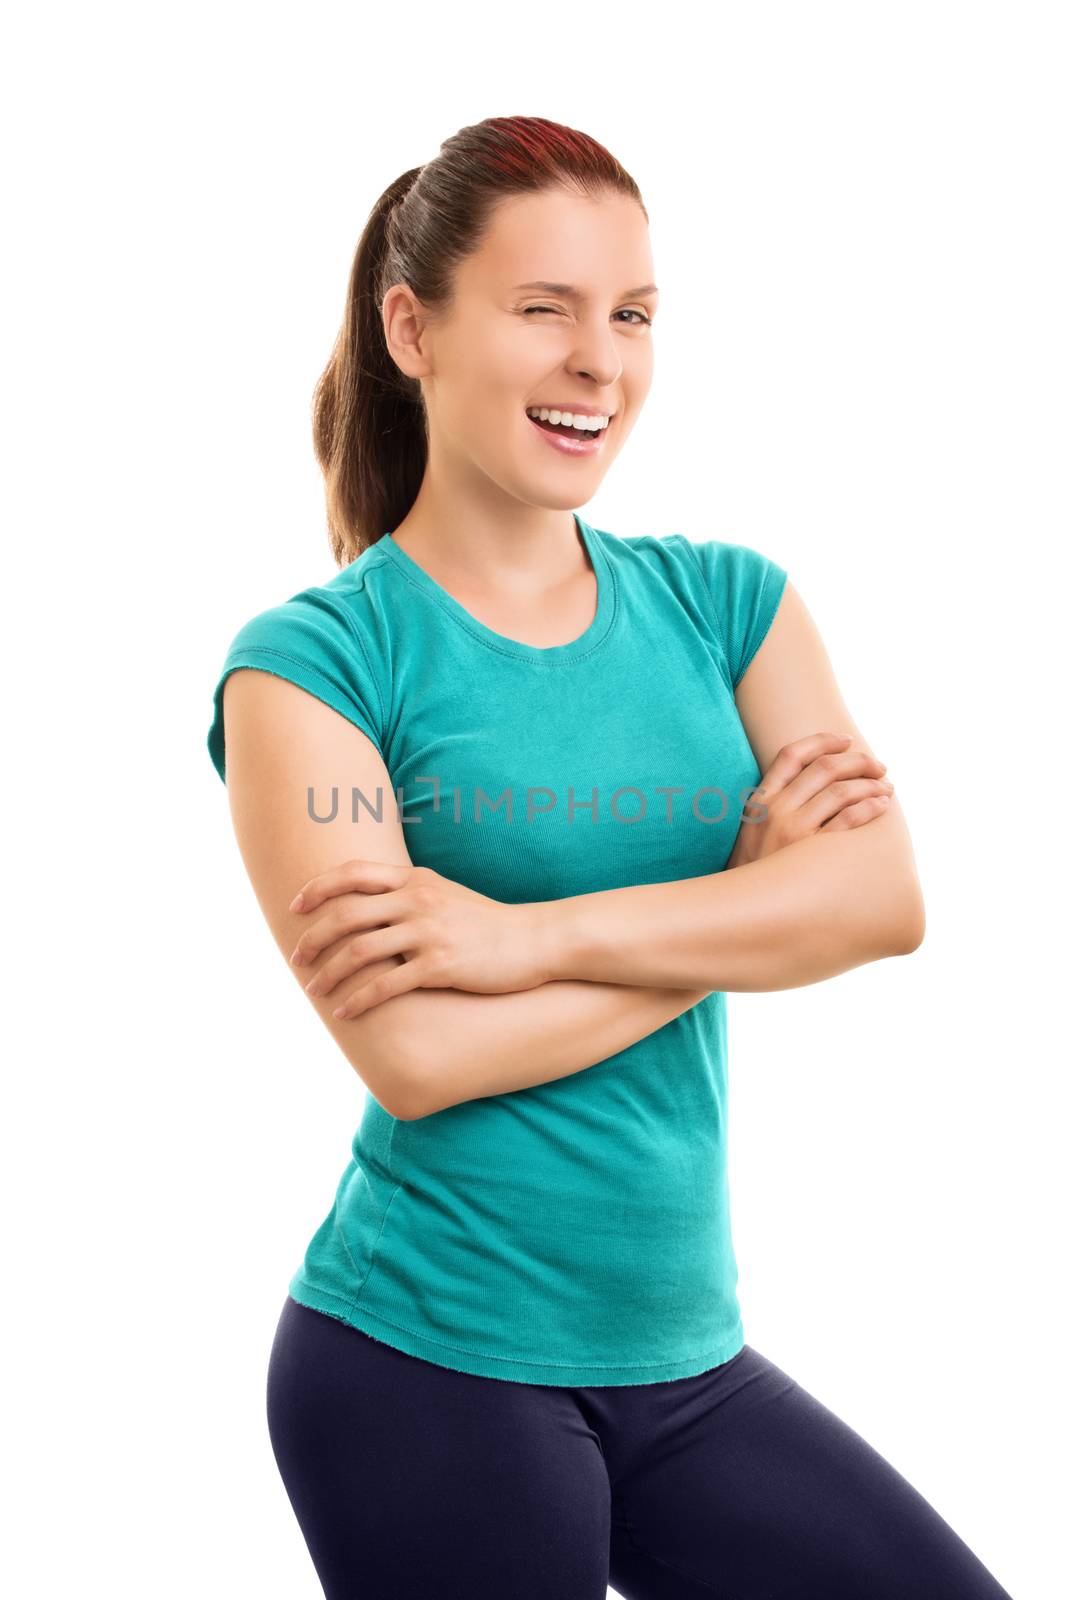 Body, mind and spirit all focused in good health. Smiling young athlete winking, isolated on white background.